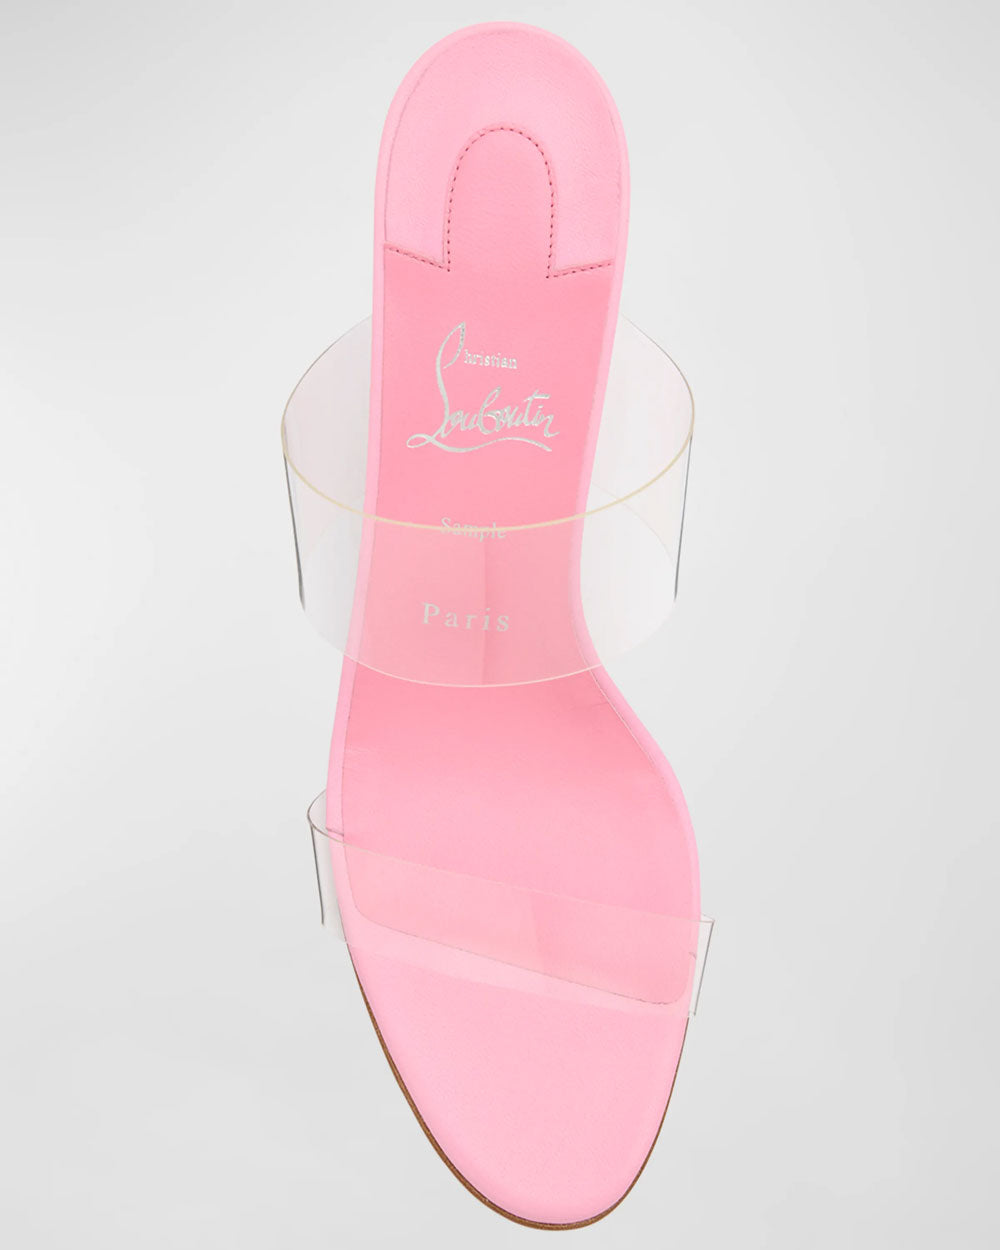 Just Nothing Sandal in Pink